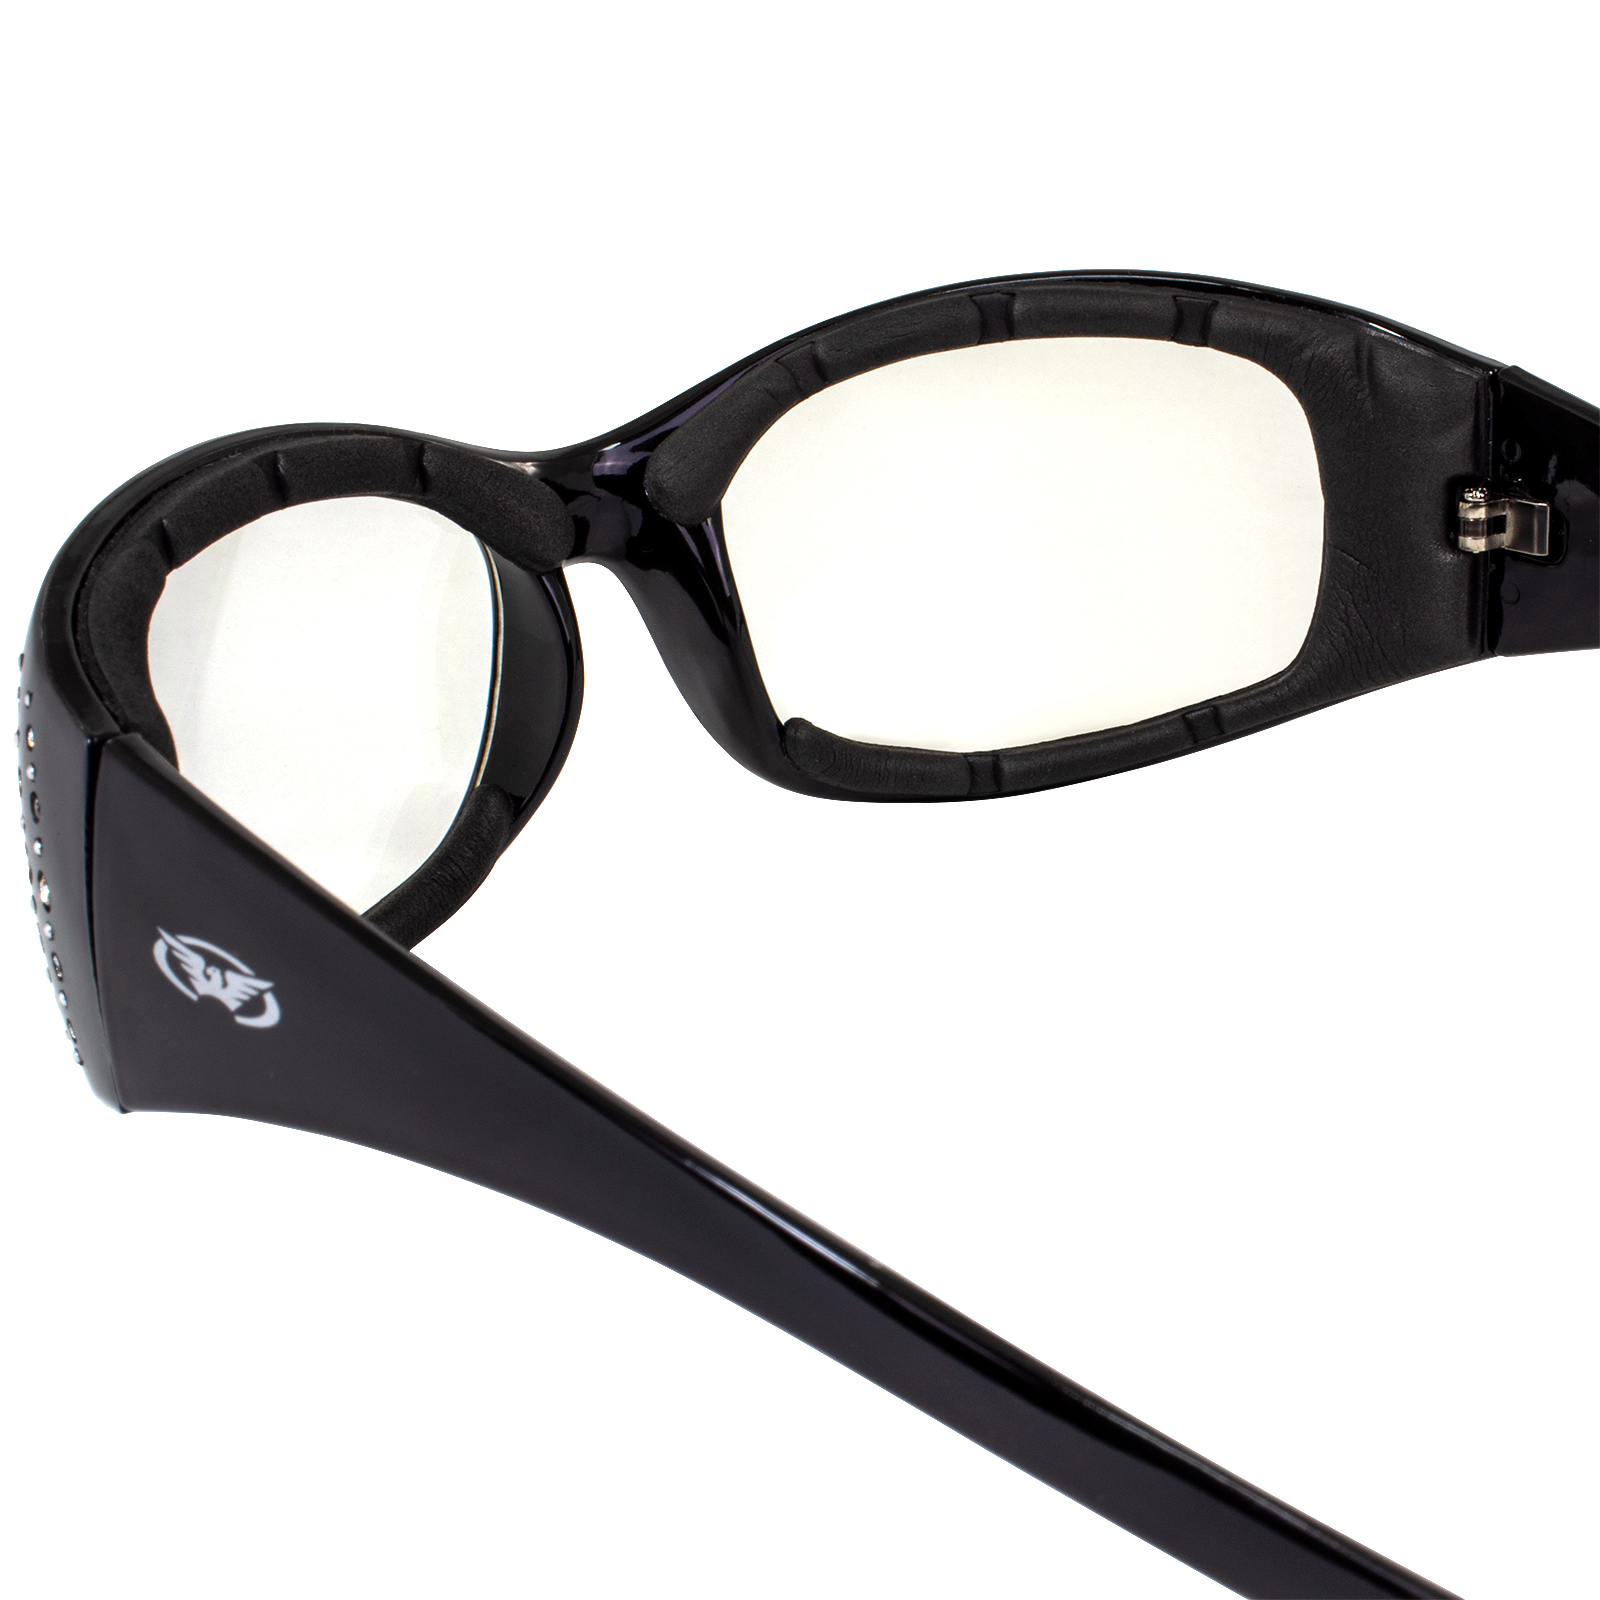 Global Vision Marilyn-2 Plus Motorcycle Riding Glasses for Women Sunglasses Black Padded Frames - image 2 of 7